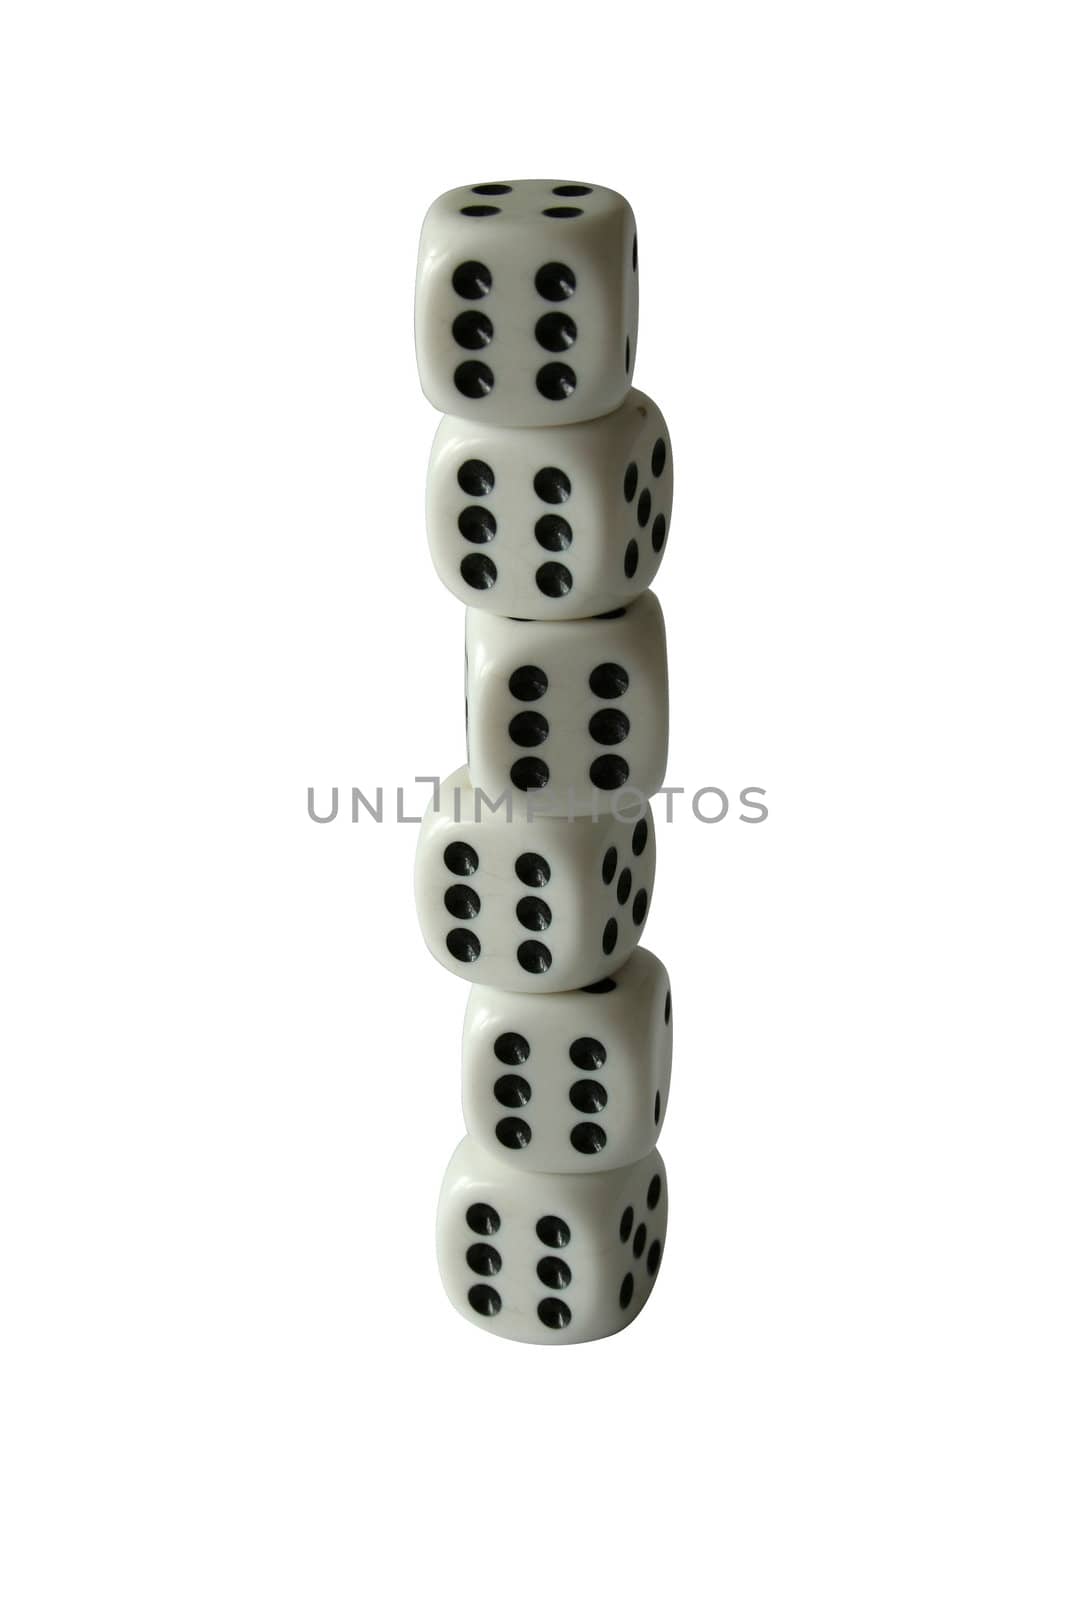 six dices isolated on white background with clipping path